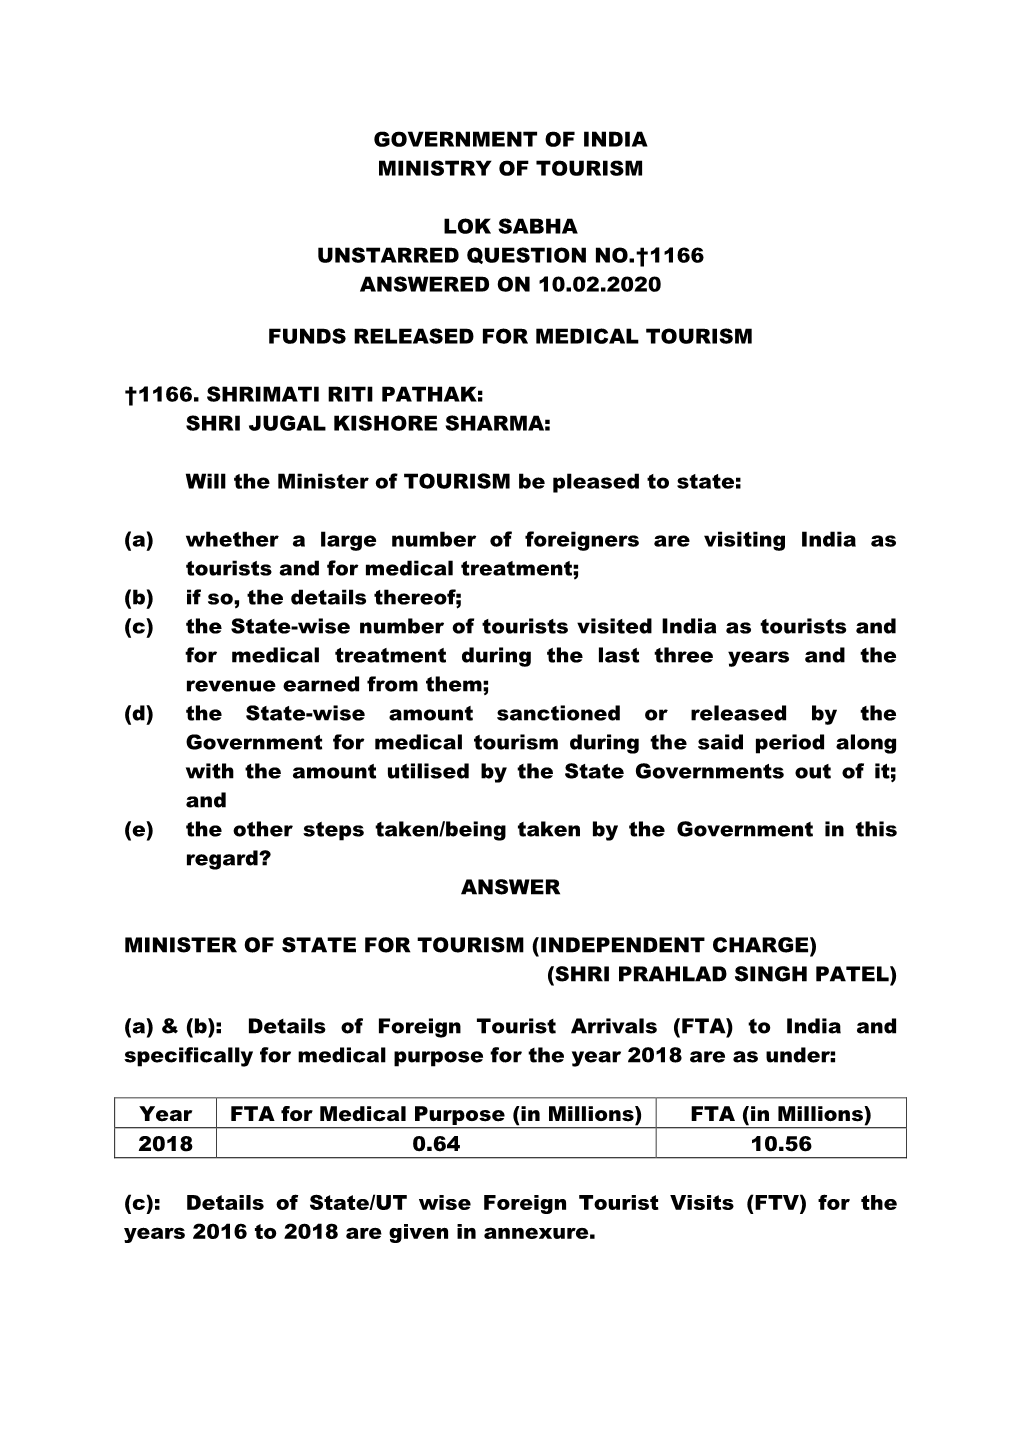 Government of India Ministry of Tourism Lok Sabha